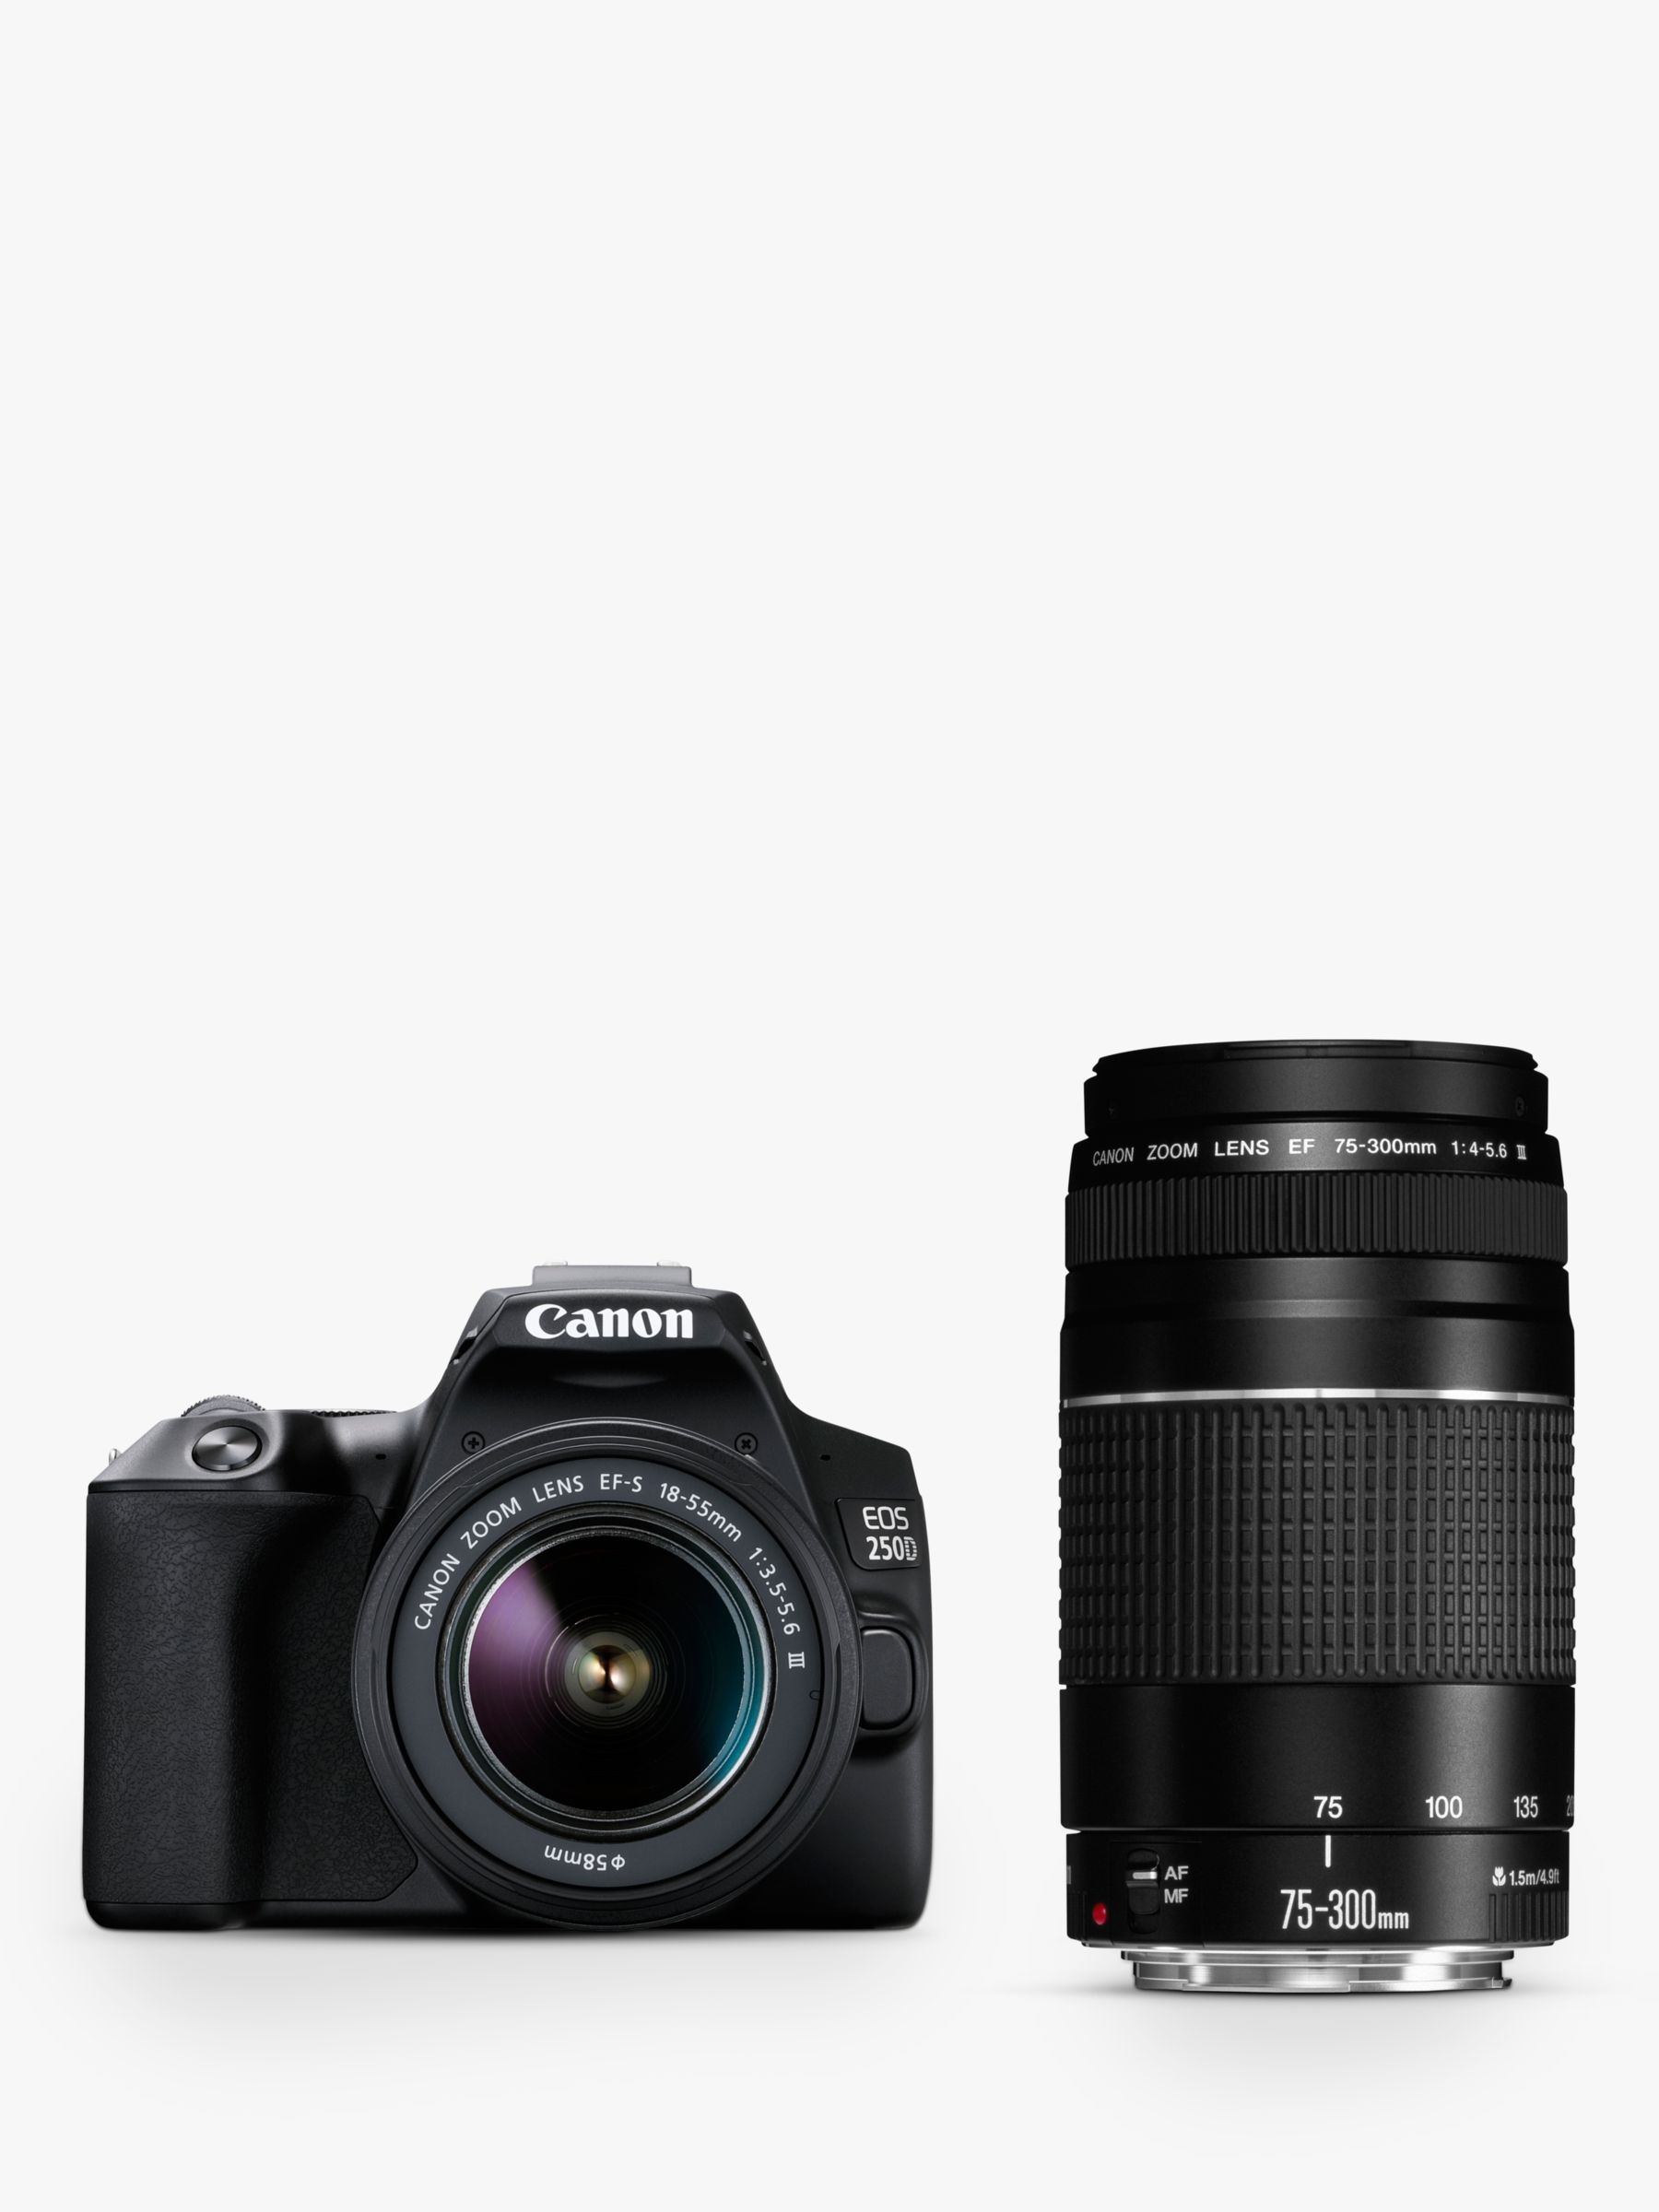 Canon EOS 250D Digital SLR Camera with 18-55mm & 75-300mm Lenses, 4K Ultra HD, 24.1MP, Wi-Fi